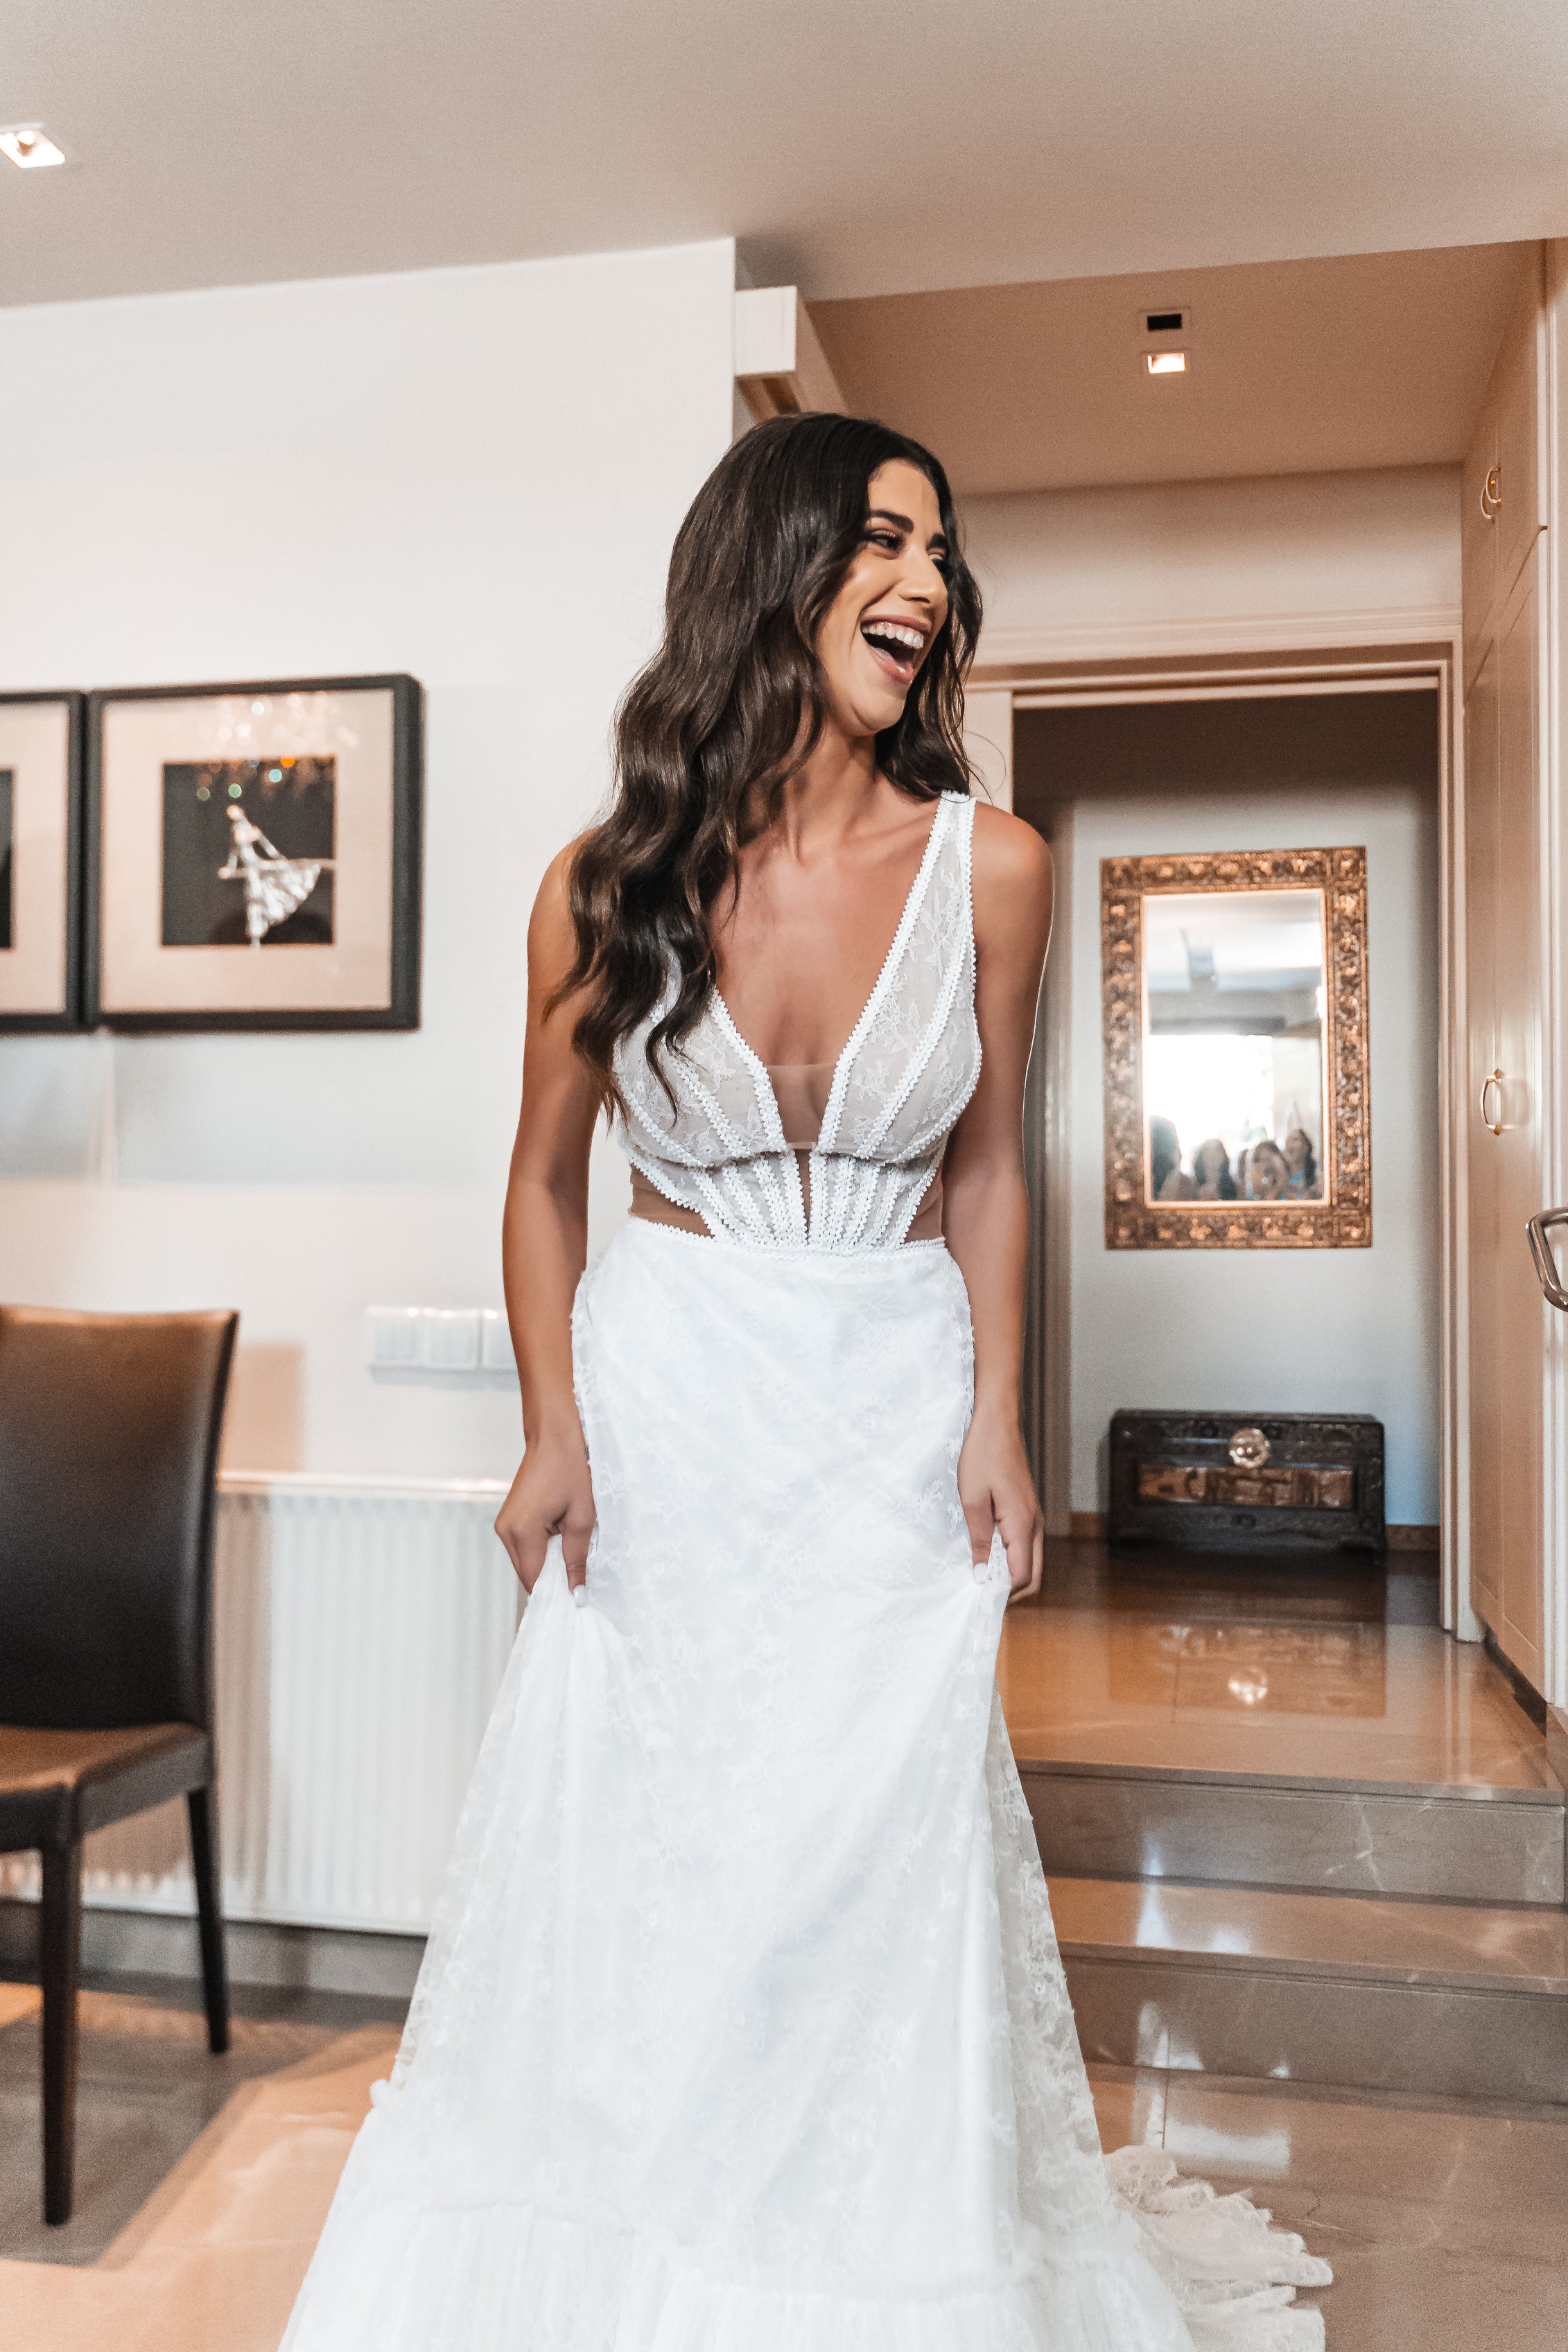 The bride's white gown flowed in the breeze as she made her way down the aisle, her groom waiting at the altar with tears in his eyes. Our wedding photographer in Limasol, Paphos, and Ayia Napa captur